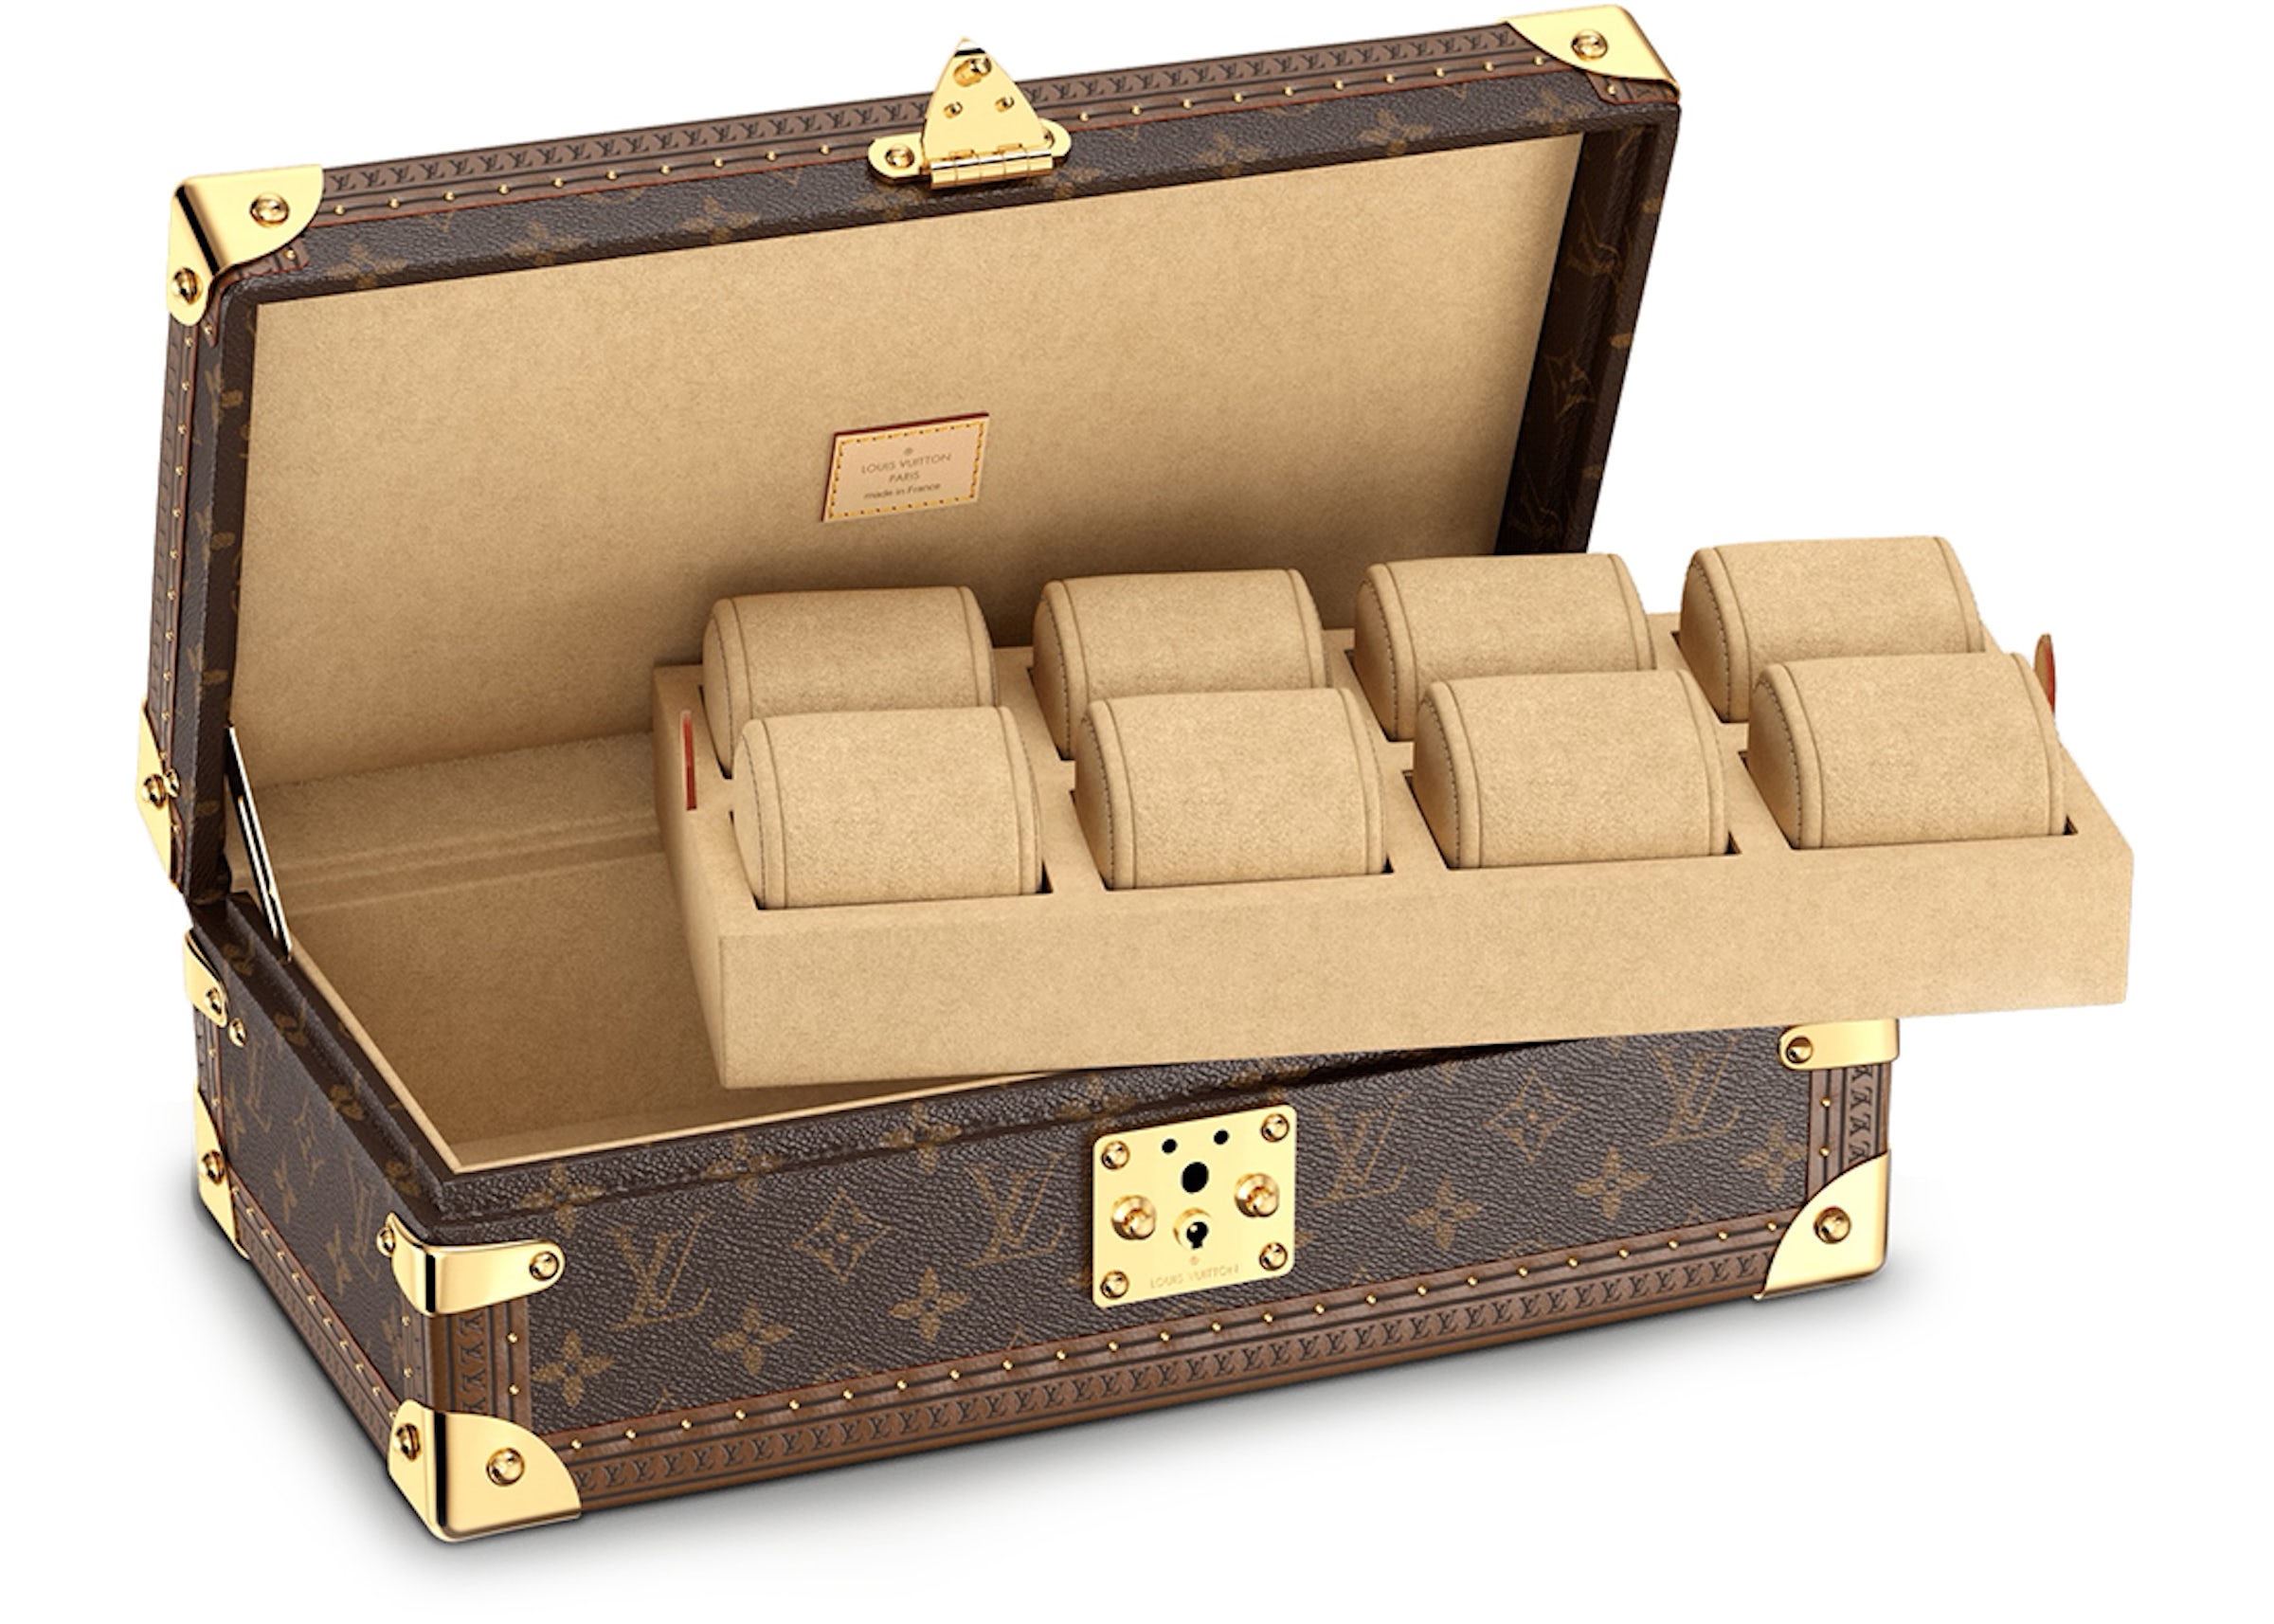 Louis Vuitton's monogrammed lipstick case is the luxury beauty accessory of  the season